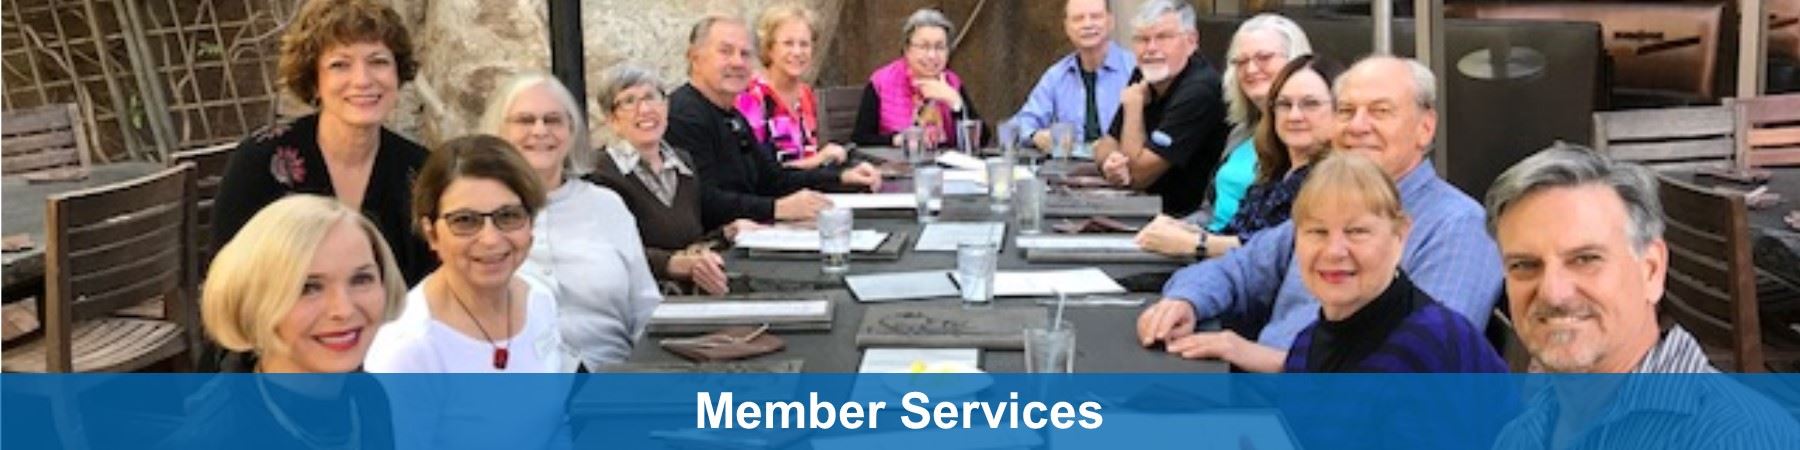 Member Services - CSU San Marcos retirees seated at table